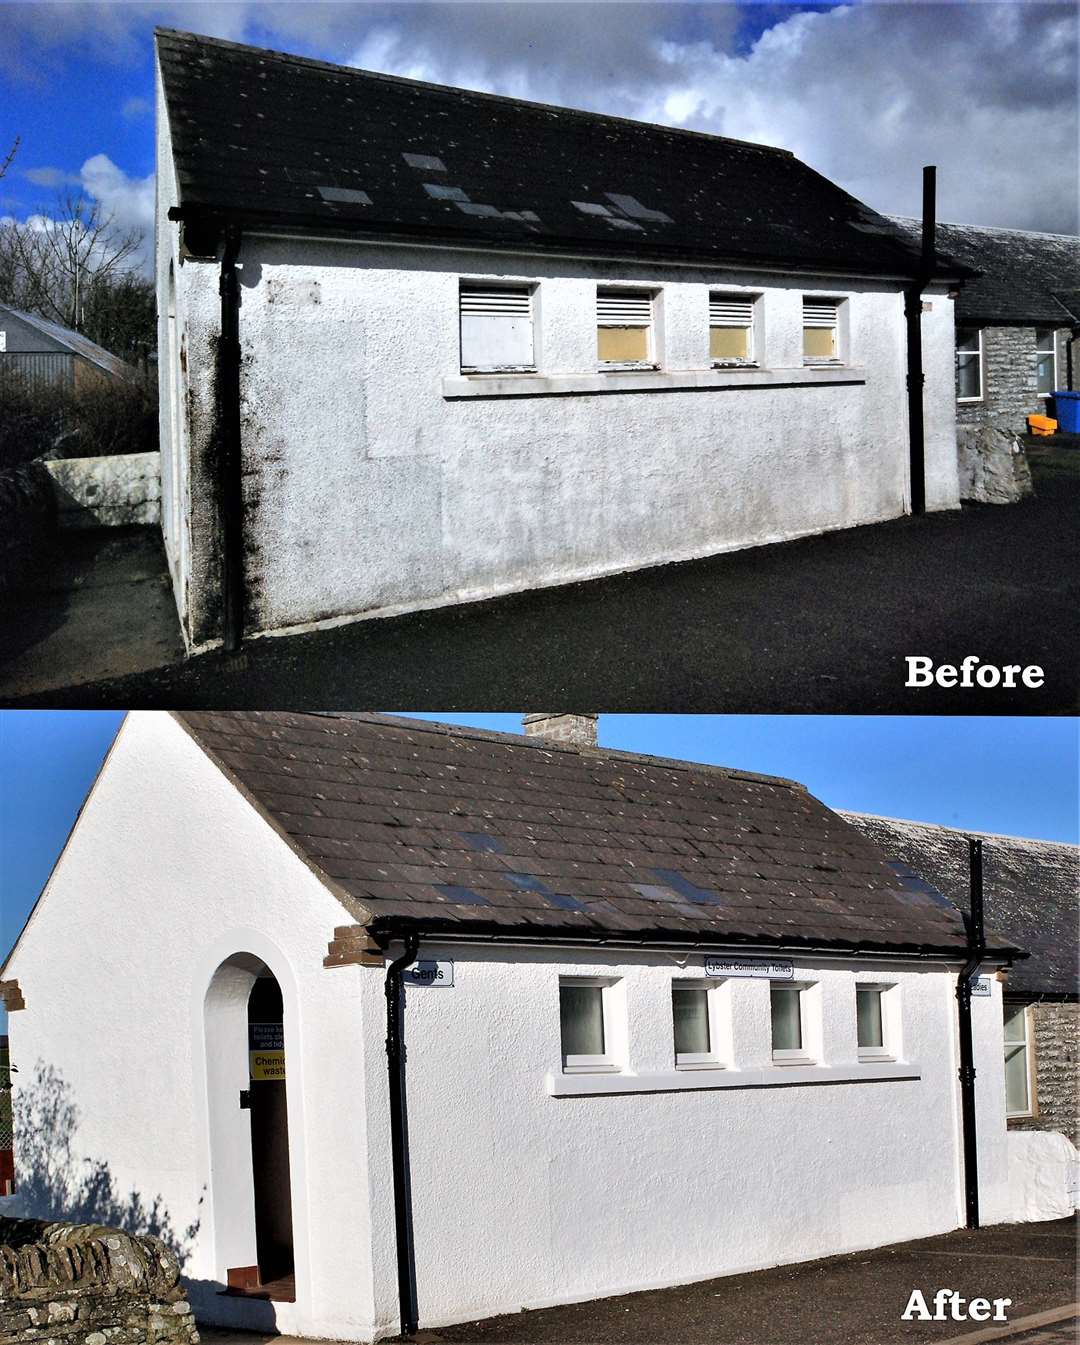 Before and after images of the Lybster toilet facility.